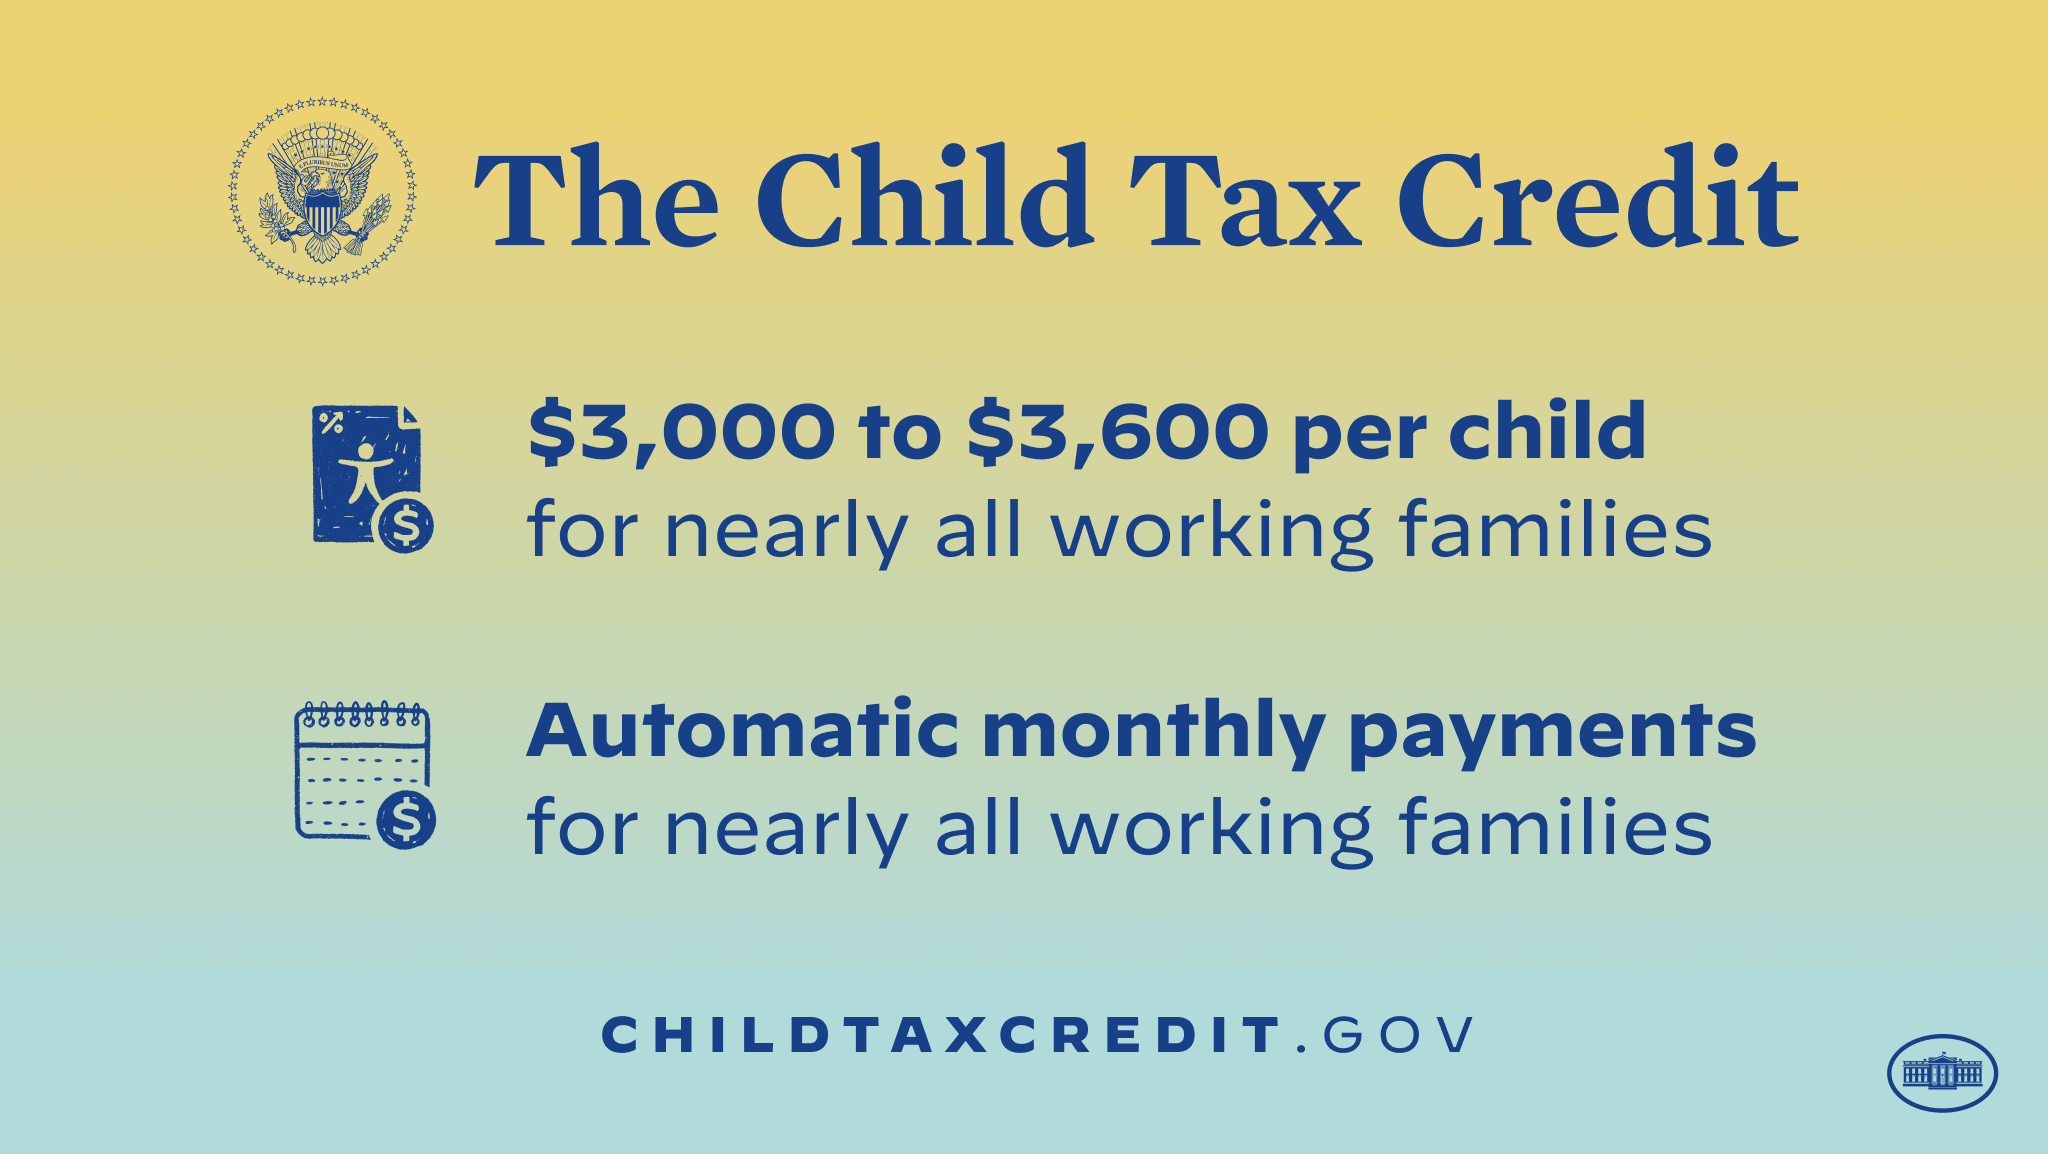 the-child-tax-credit-toolkit-the-white-house